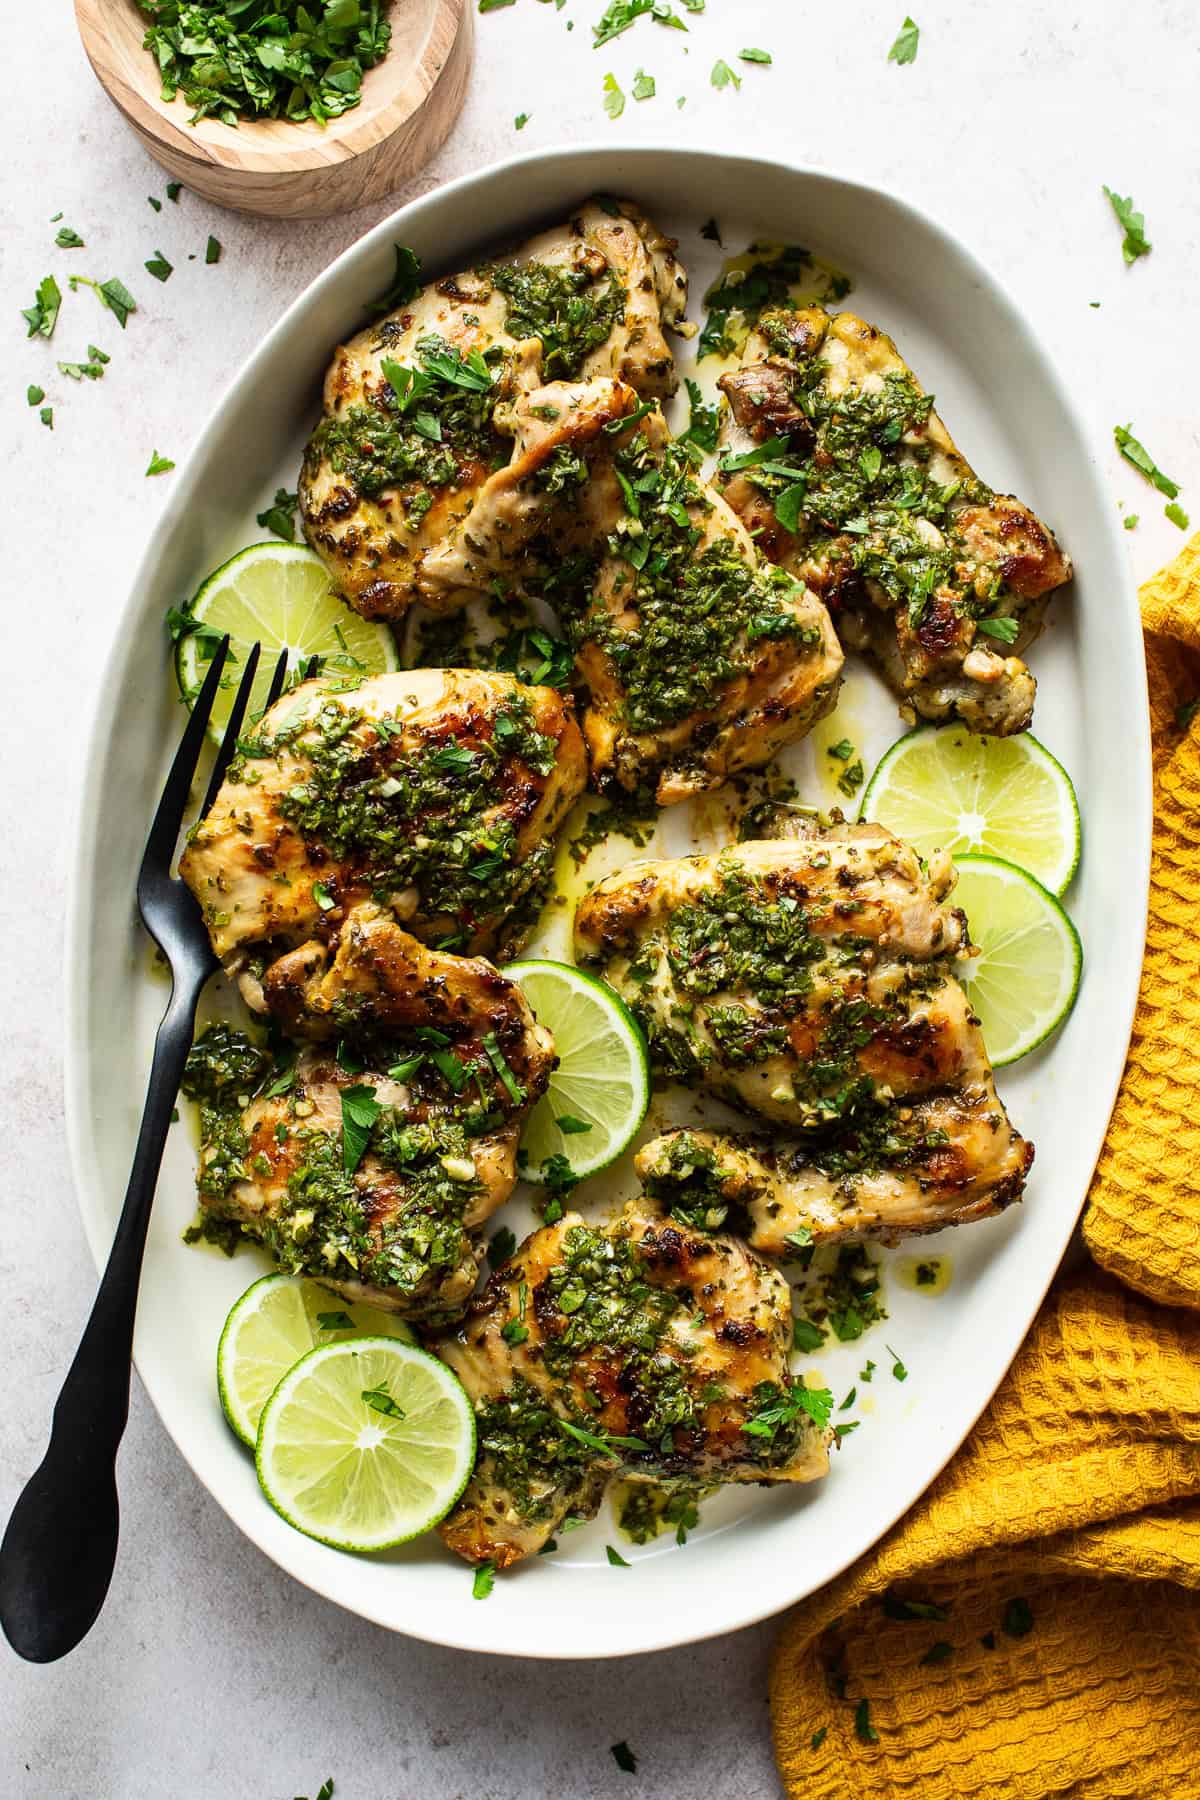 Chimichurri chicken served on a plate with lime slices